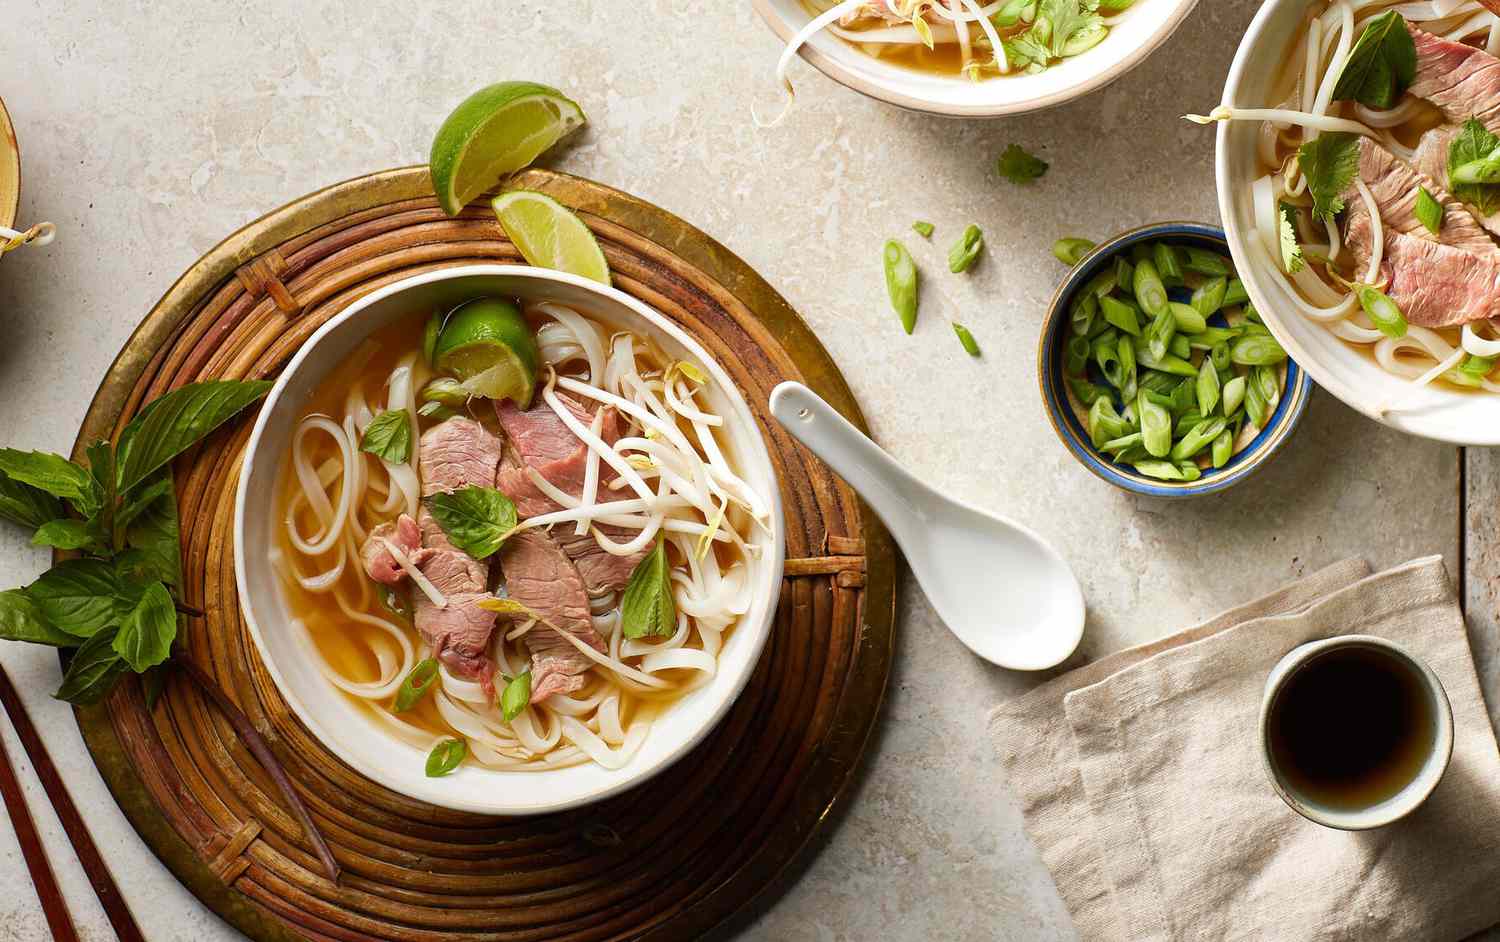 Rice noodles and thinly sliced beef in a bowl of beef broth, garnished with lime and basil